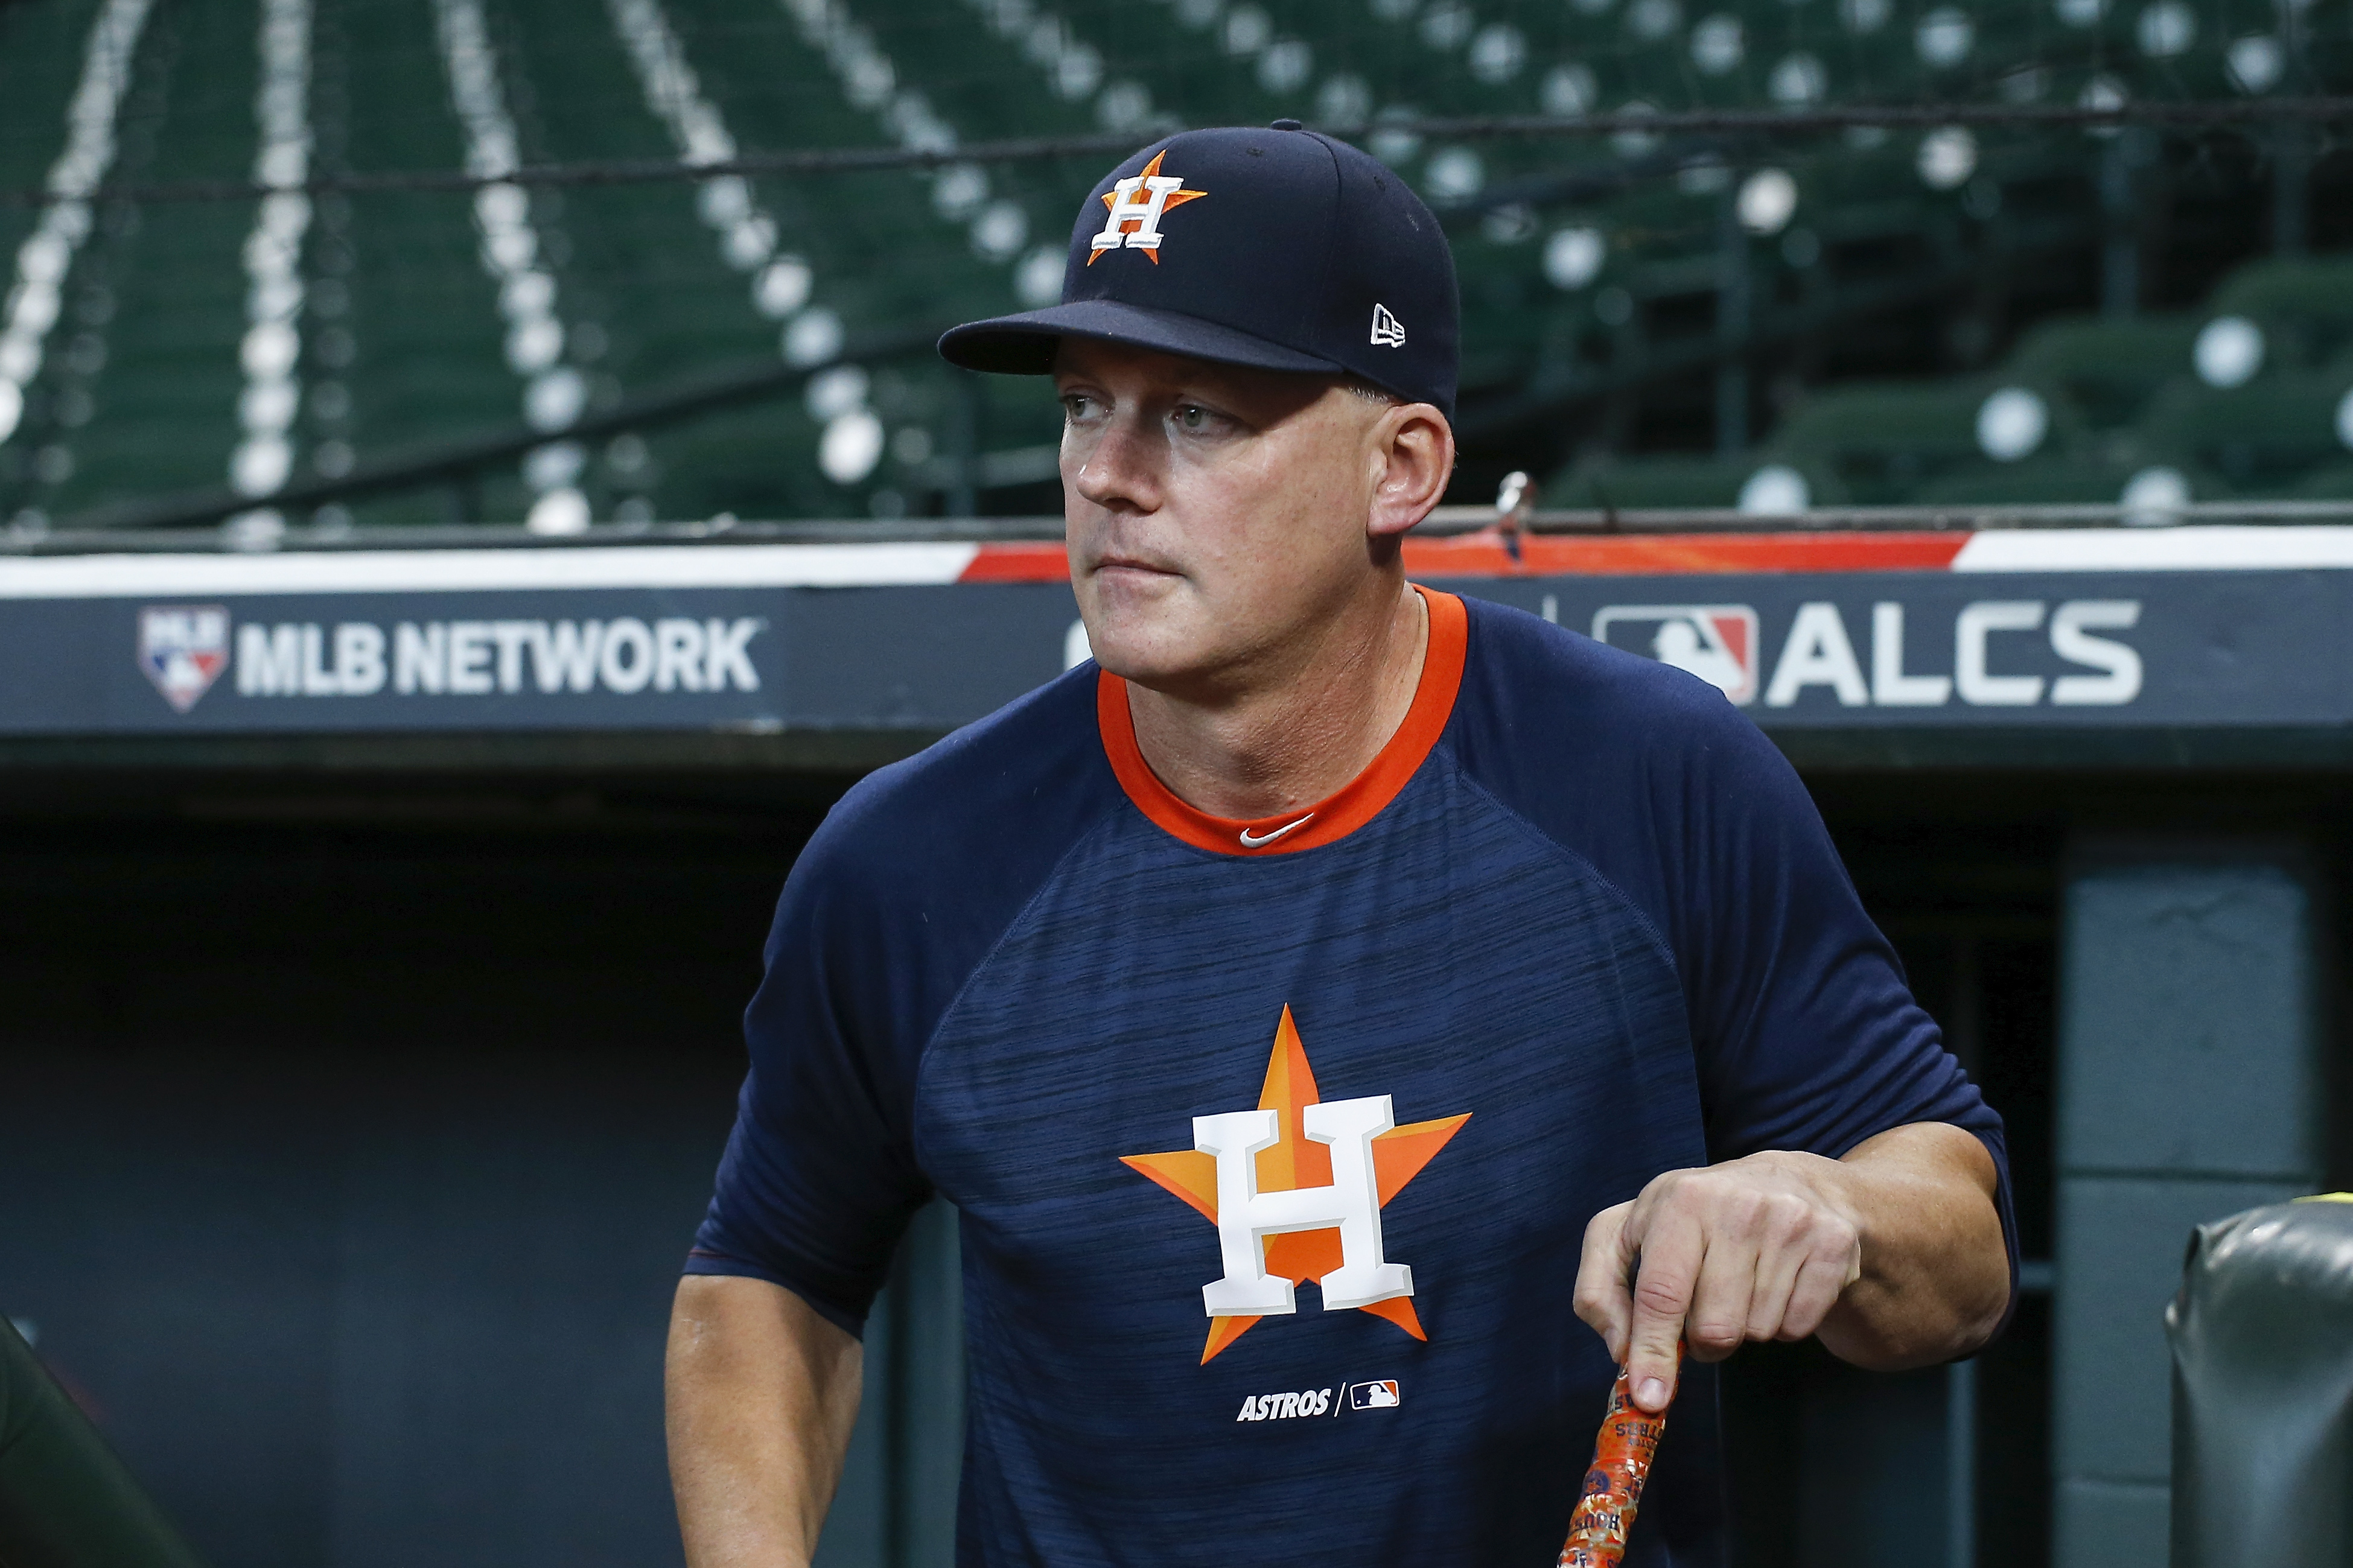 Houston Astros coach, GM fired for role in cheating scandal